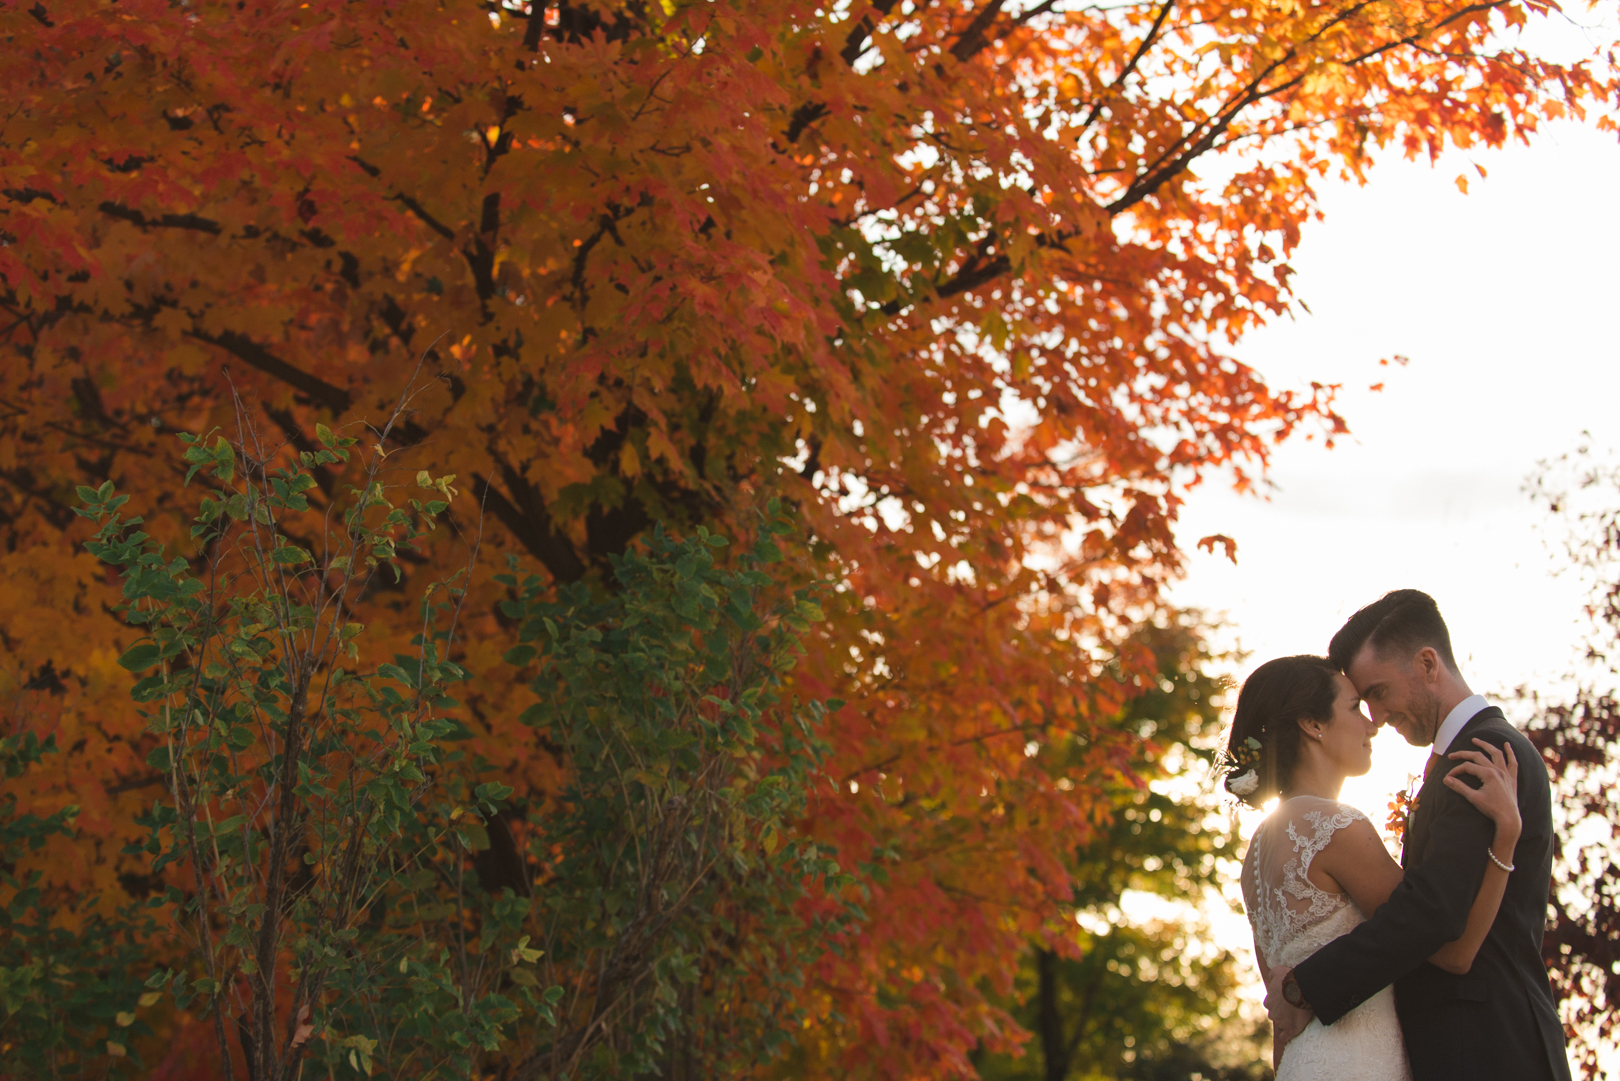 bride and groom cuddling at sunset by vibrant orange tree